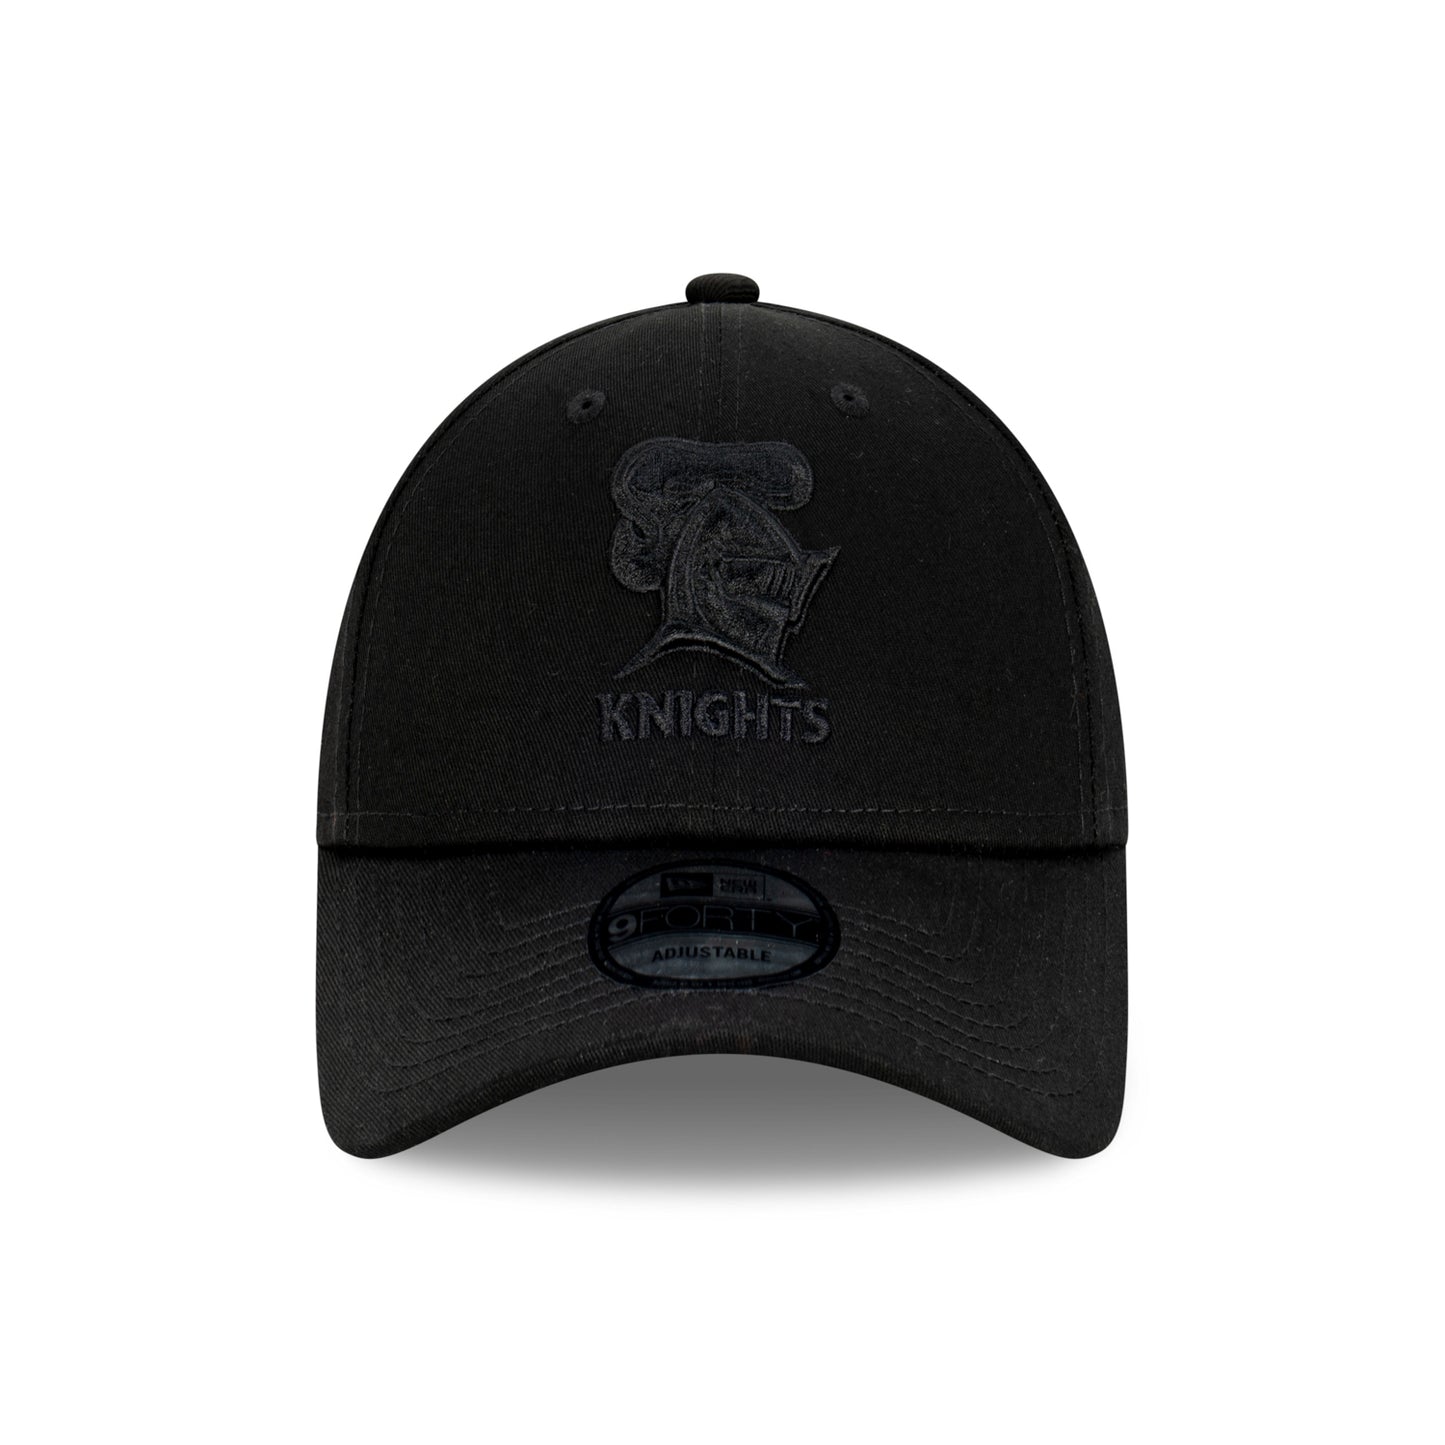 Newcastle Knights 9Forty Snapback Cap